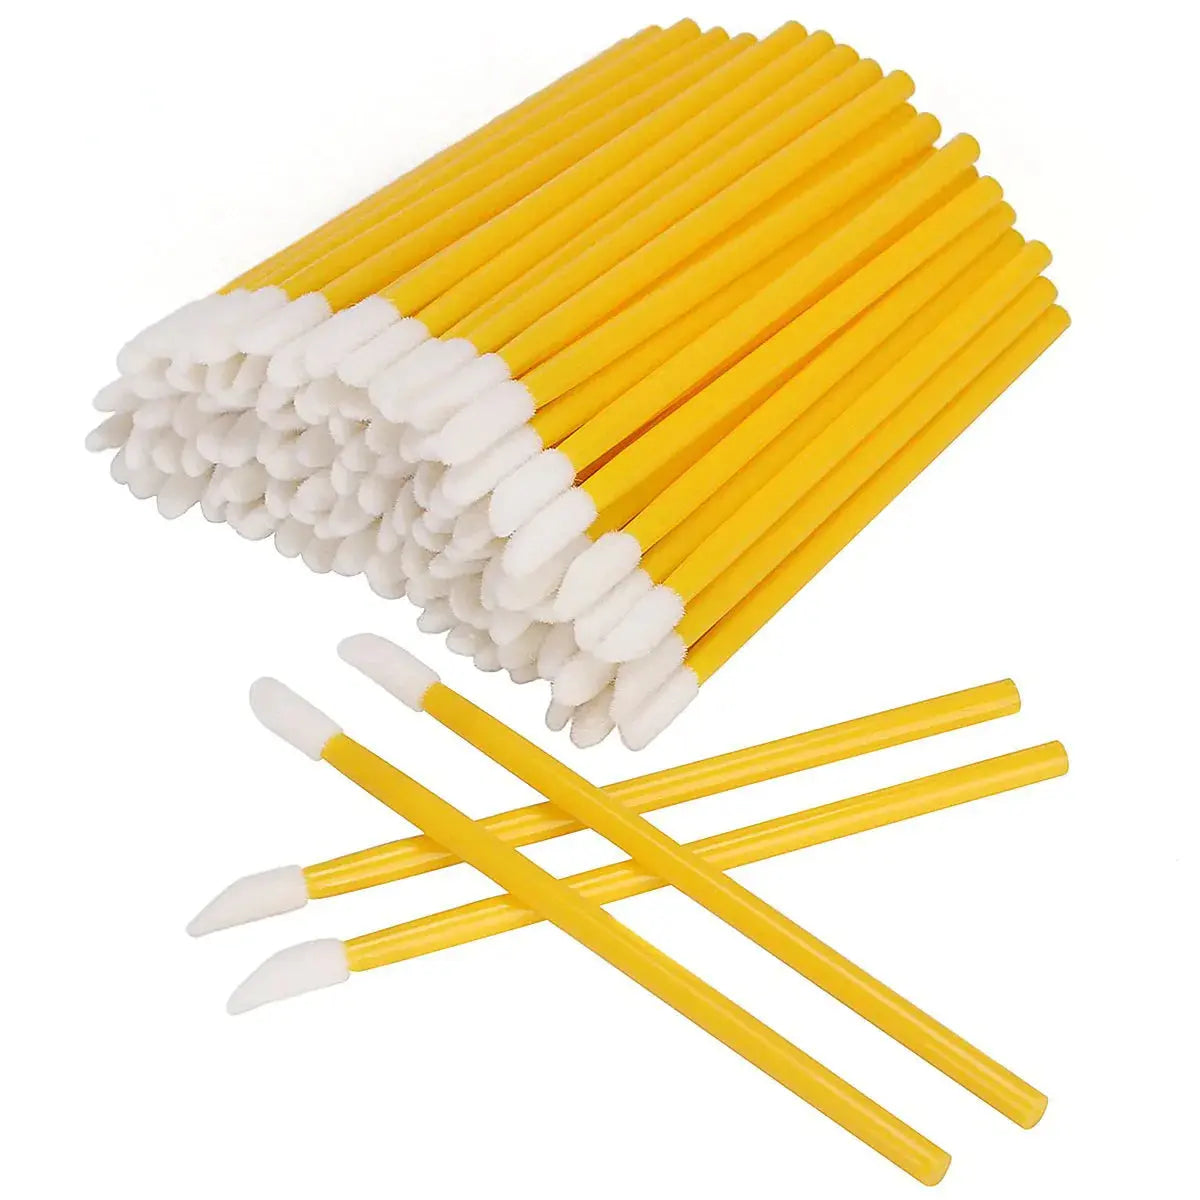 Colorful Lint Free Applicators Brush 50 Pieces/Pack Redberry